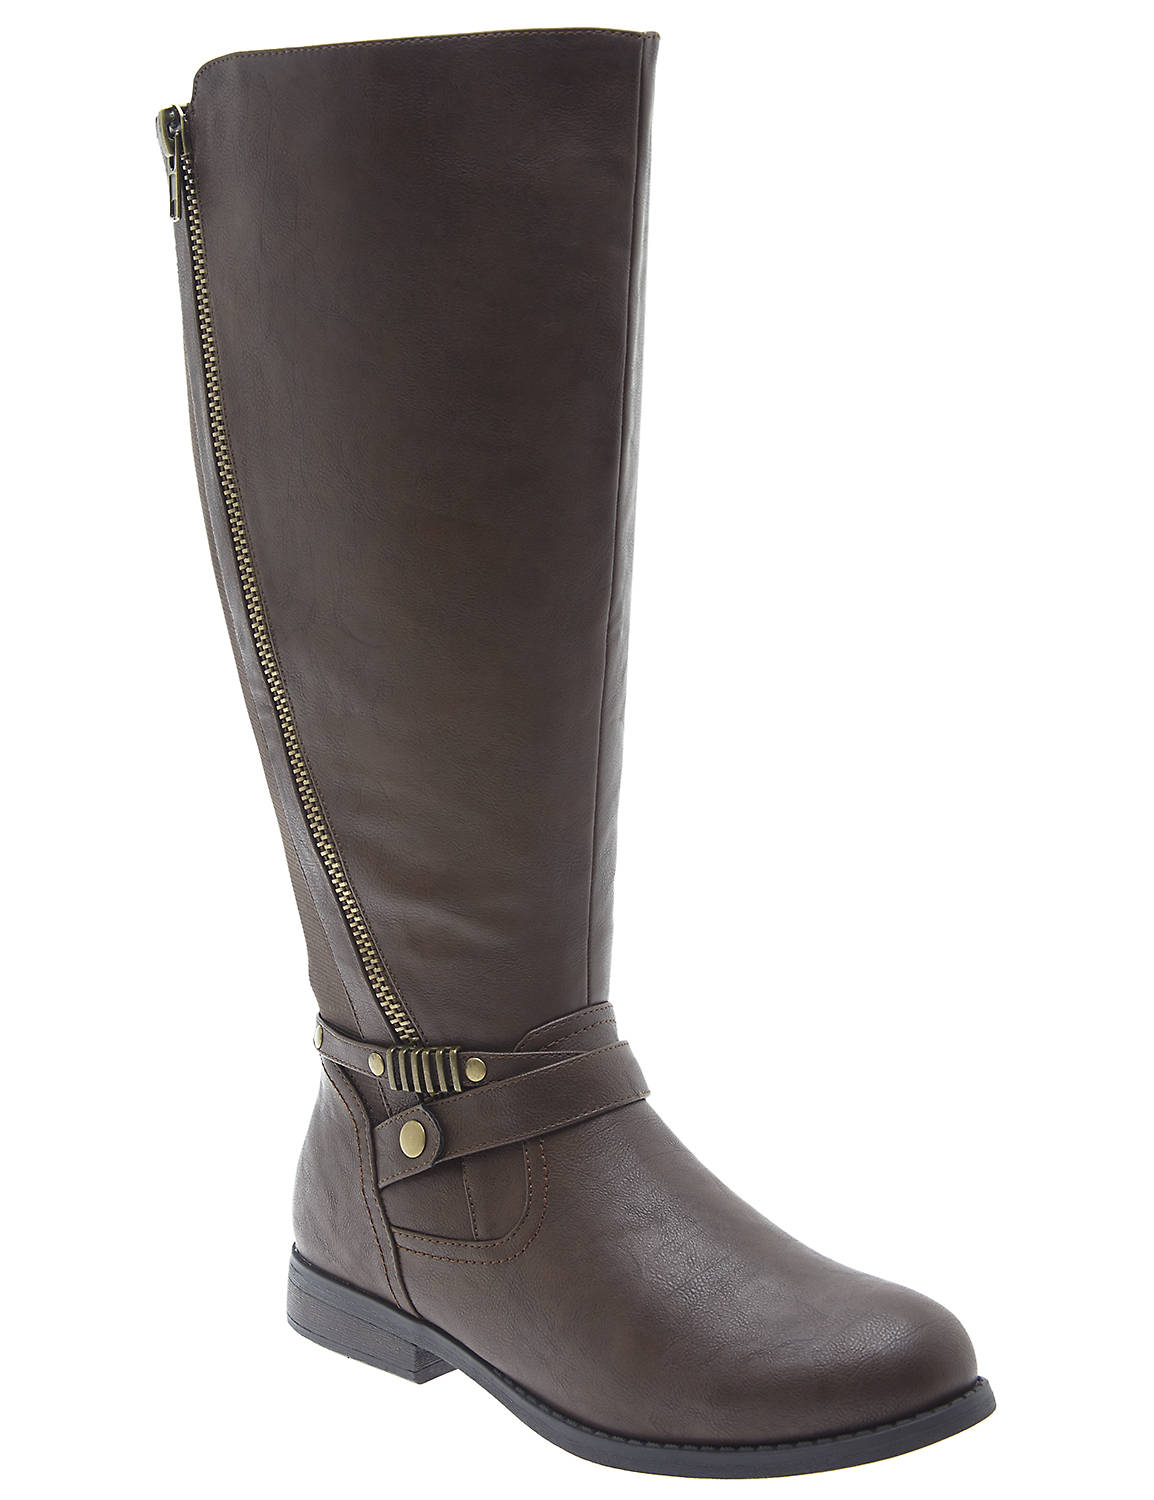 ZIPPER DETAIL RIDING BOOT Product Image 1